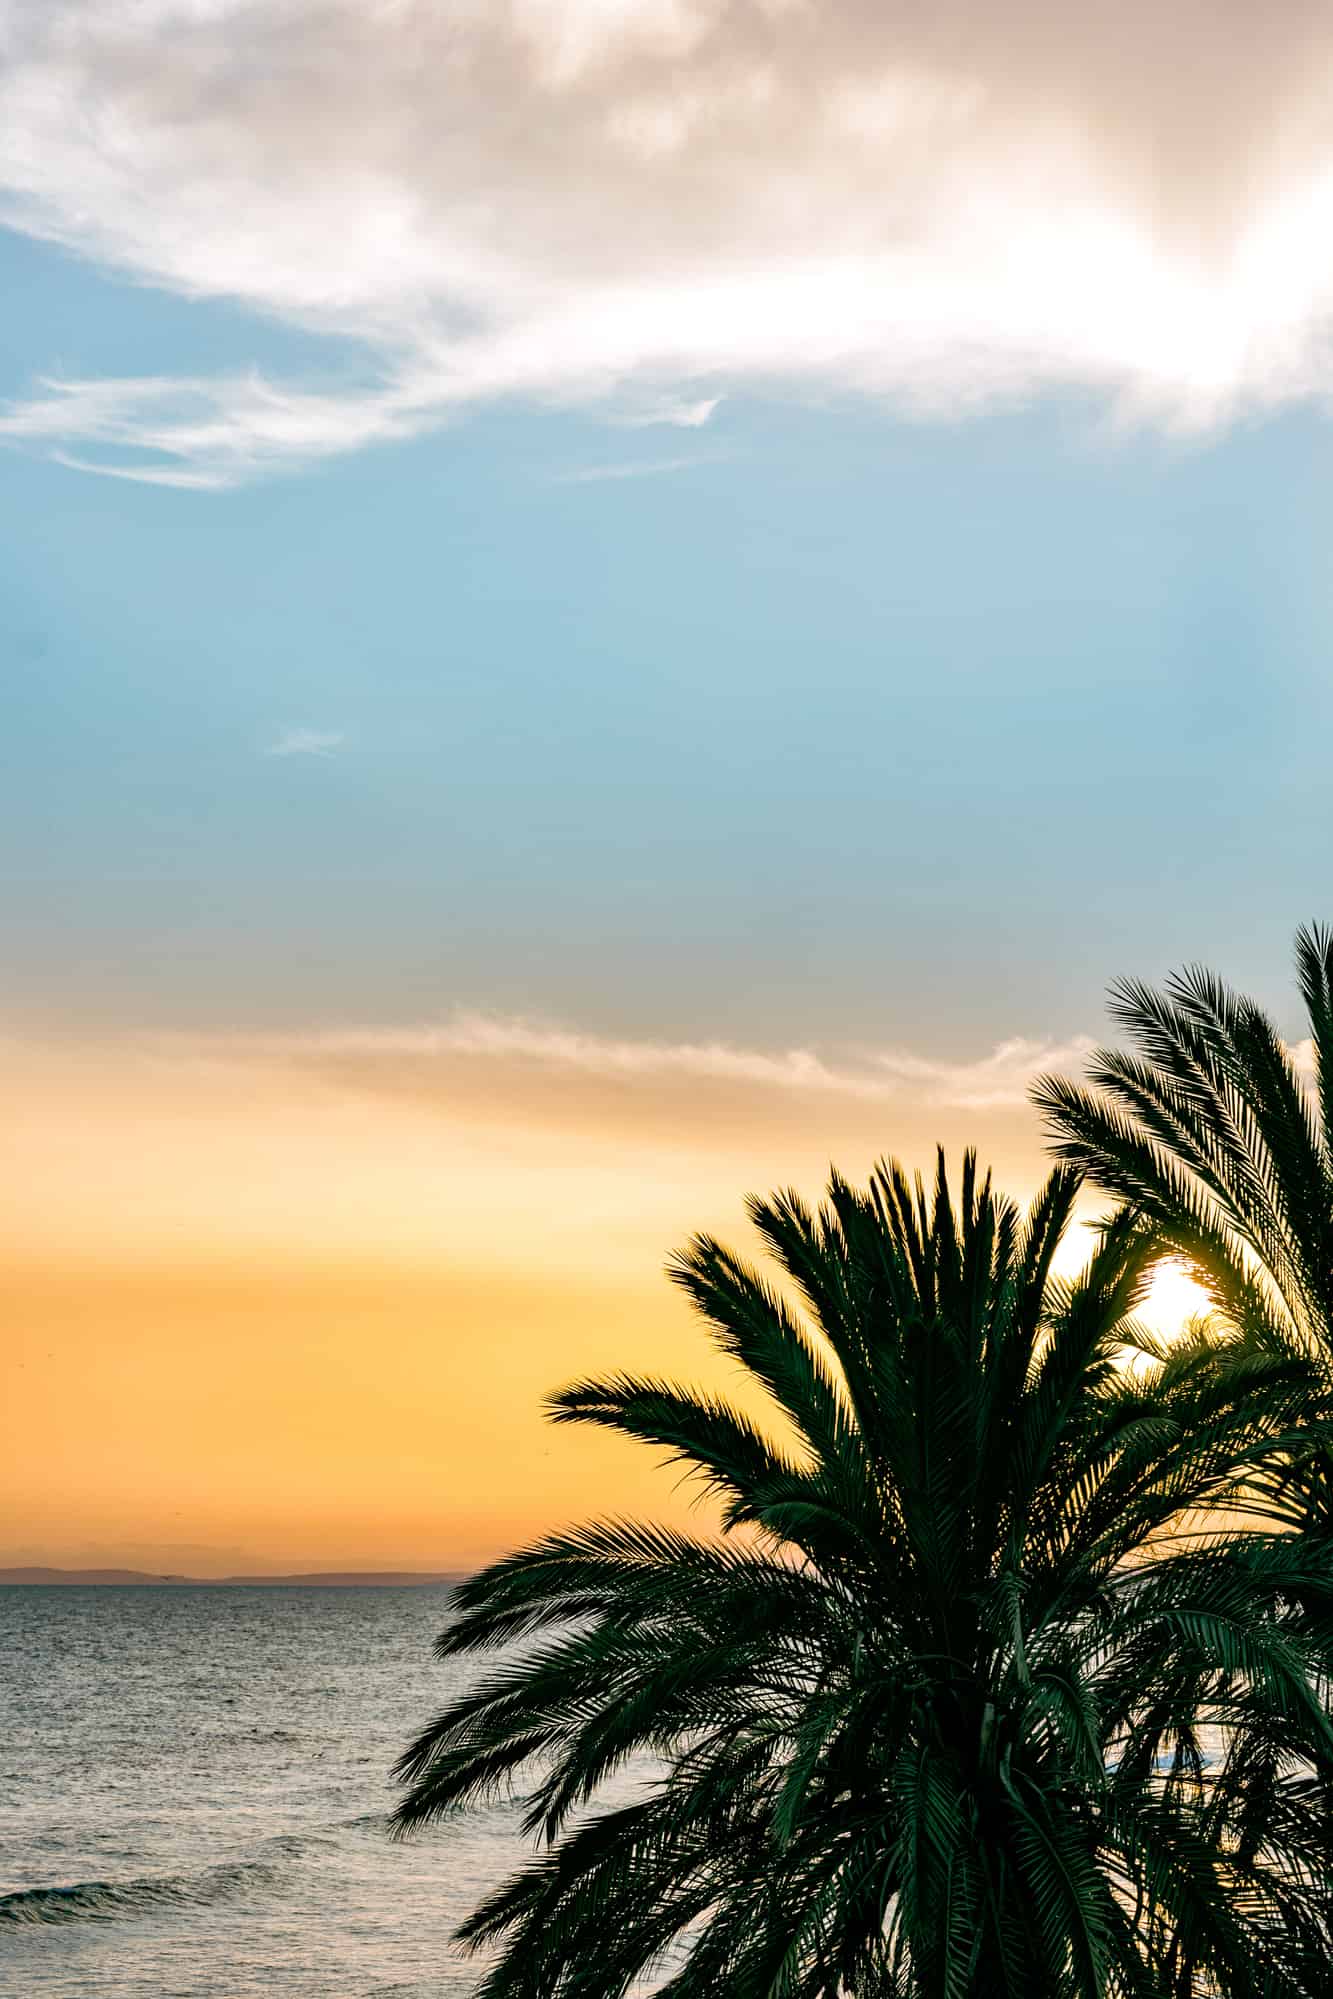 Palm tree silhouettes at sunset. Marbella, Spain. Colorful landscape